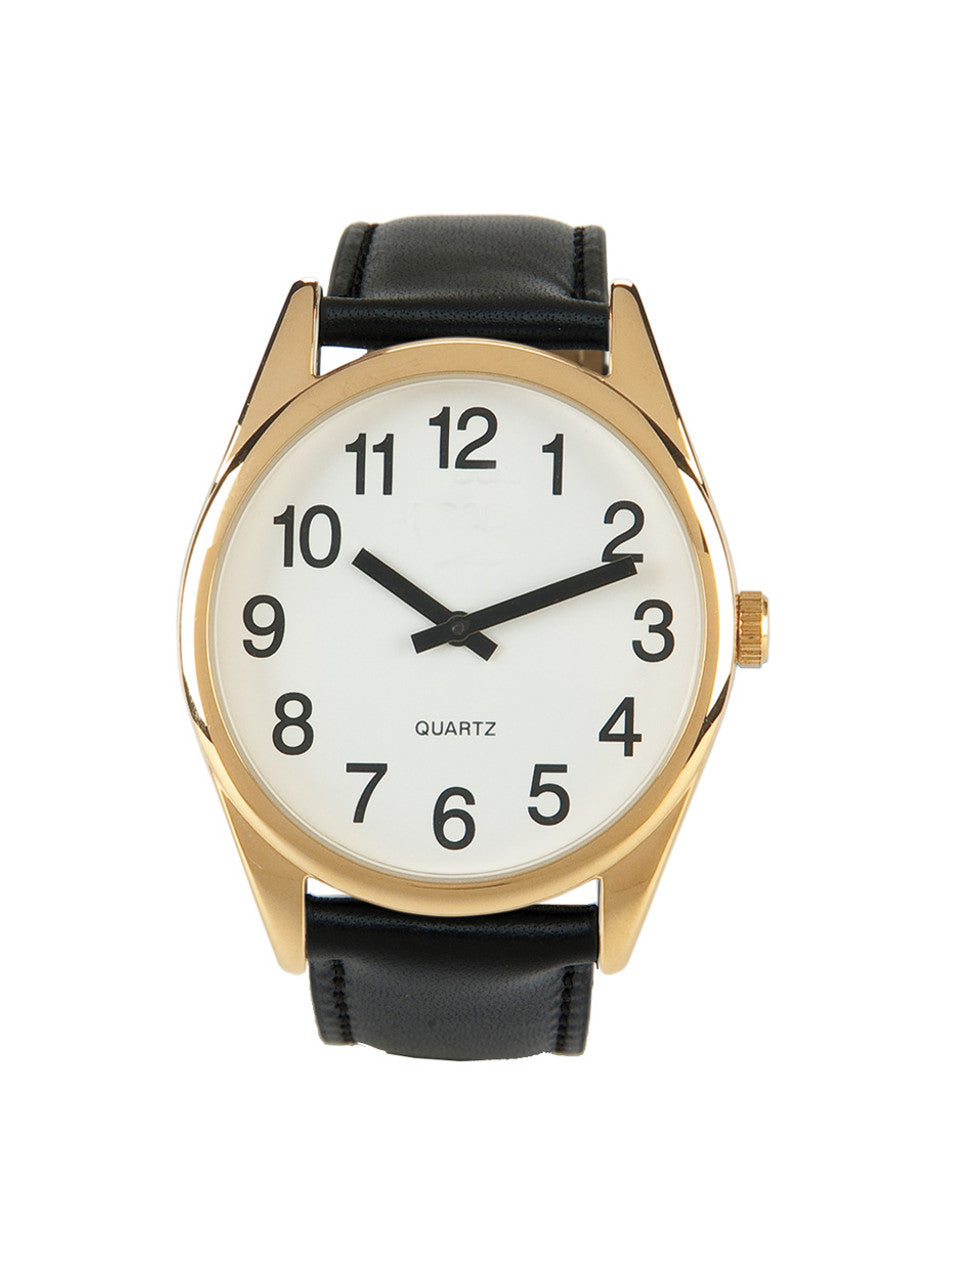 Low Vision Gold Tone Watch with White Face, black hands and numbers, and a black leather band.